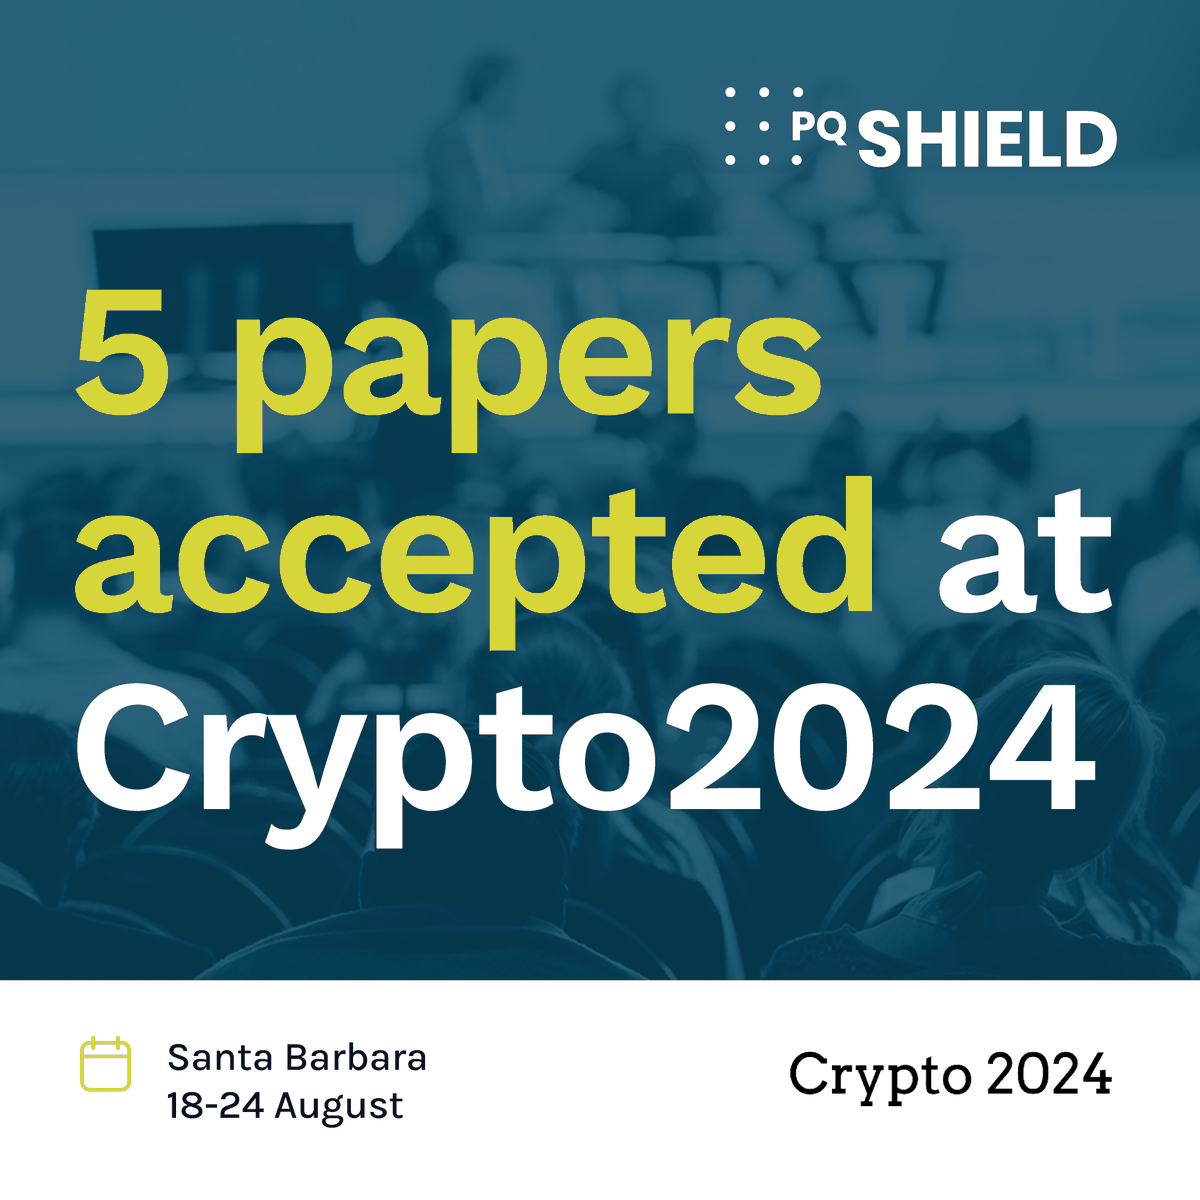 Crypto 2024 will take place in Santa Barbara, USA on 18-22 August 2024. PQShield is proud to share that we have had an impressive 5 papers accepted for this event! Read More: hubs.li/Q02y0JJK0 #cryptography #cybersecurity